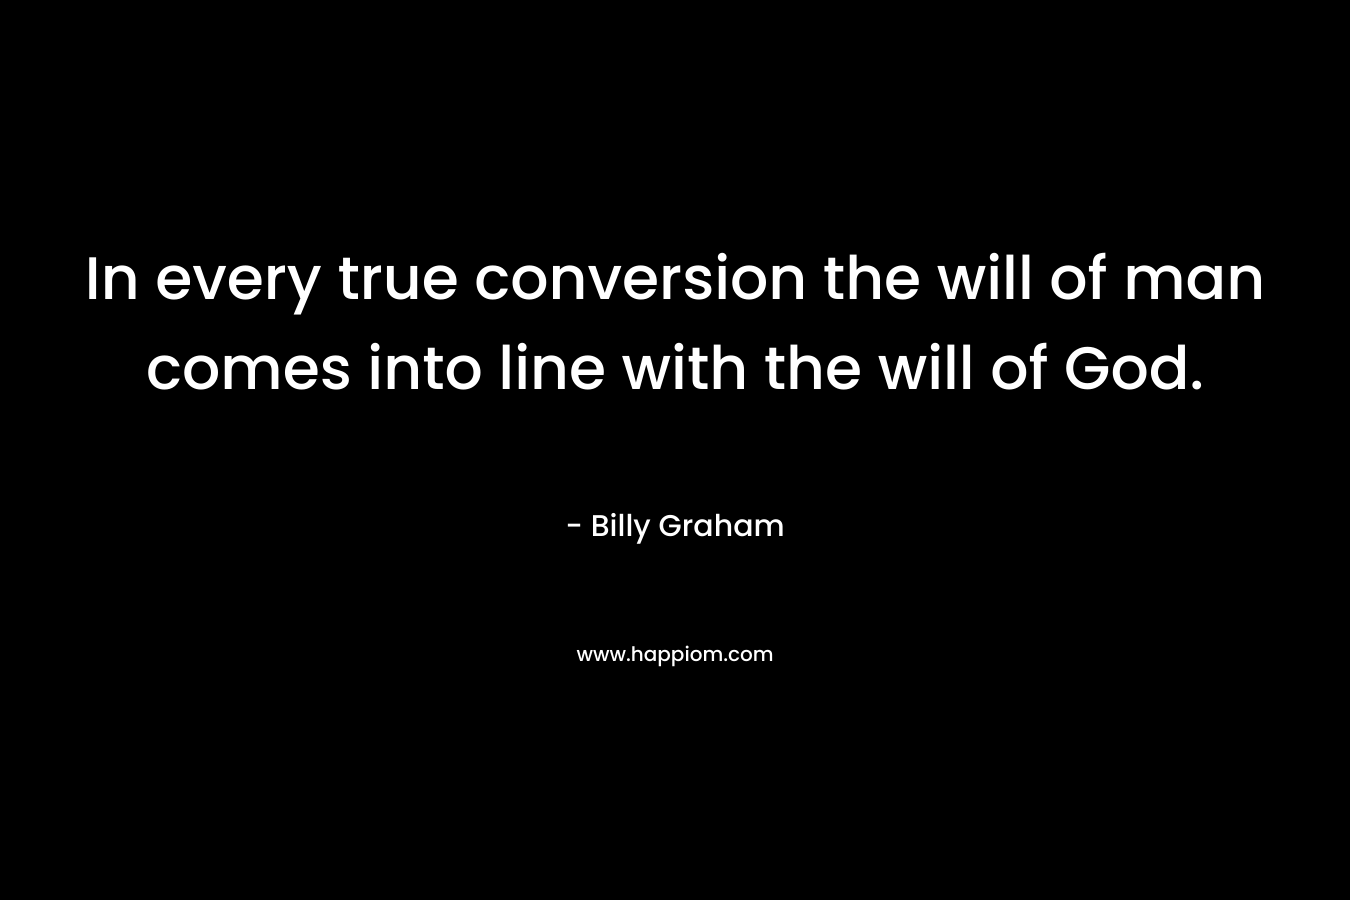 In every true conversion the will of man comes into line with the will of God.